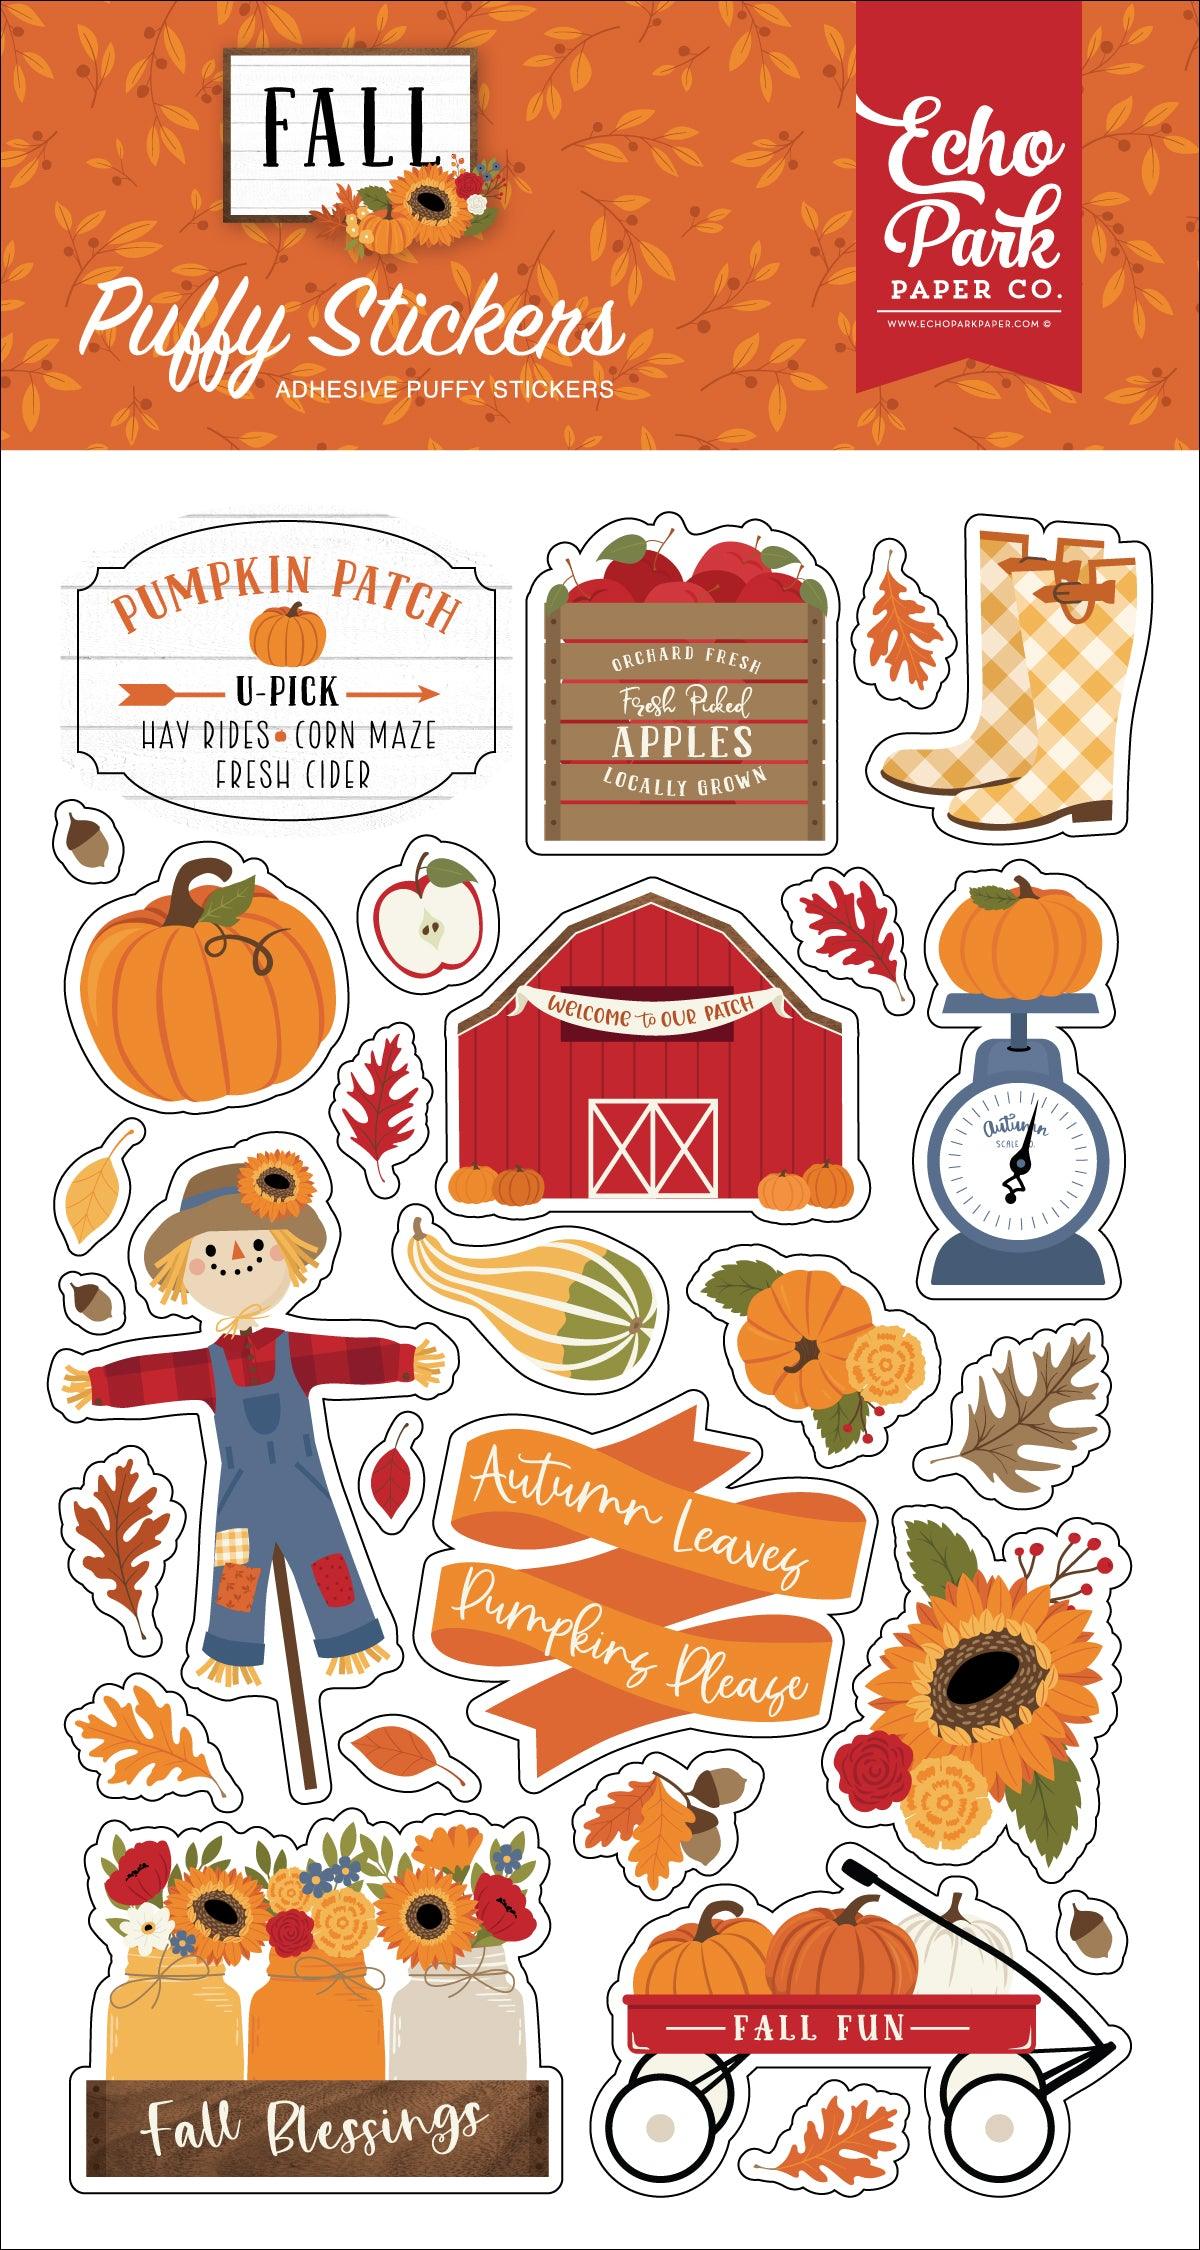 Fall Collection 4 x 7 Puffy Stickers Scrapbook Embellishments by Echo Park Paper - Scrapbook Supply Companies